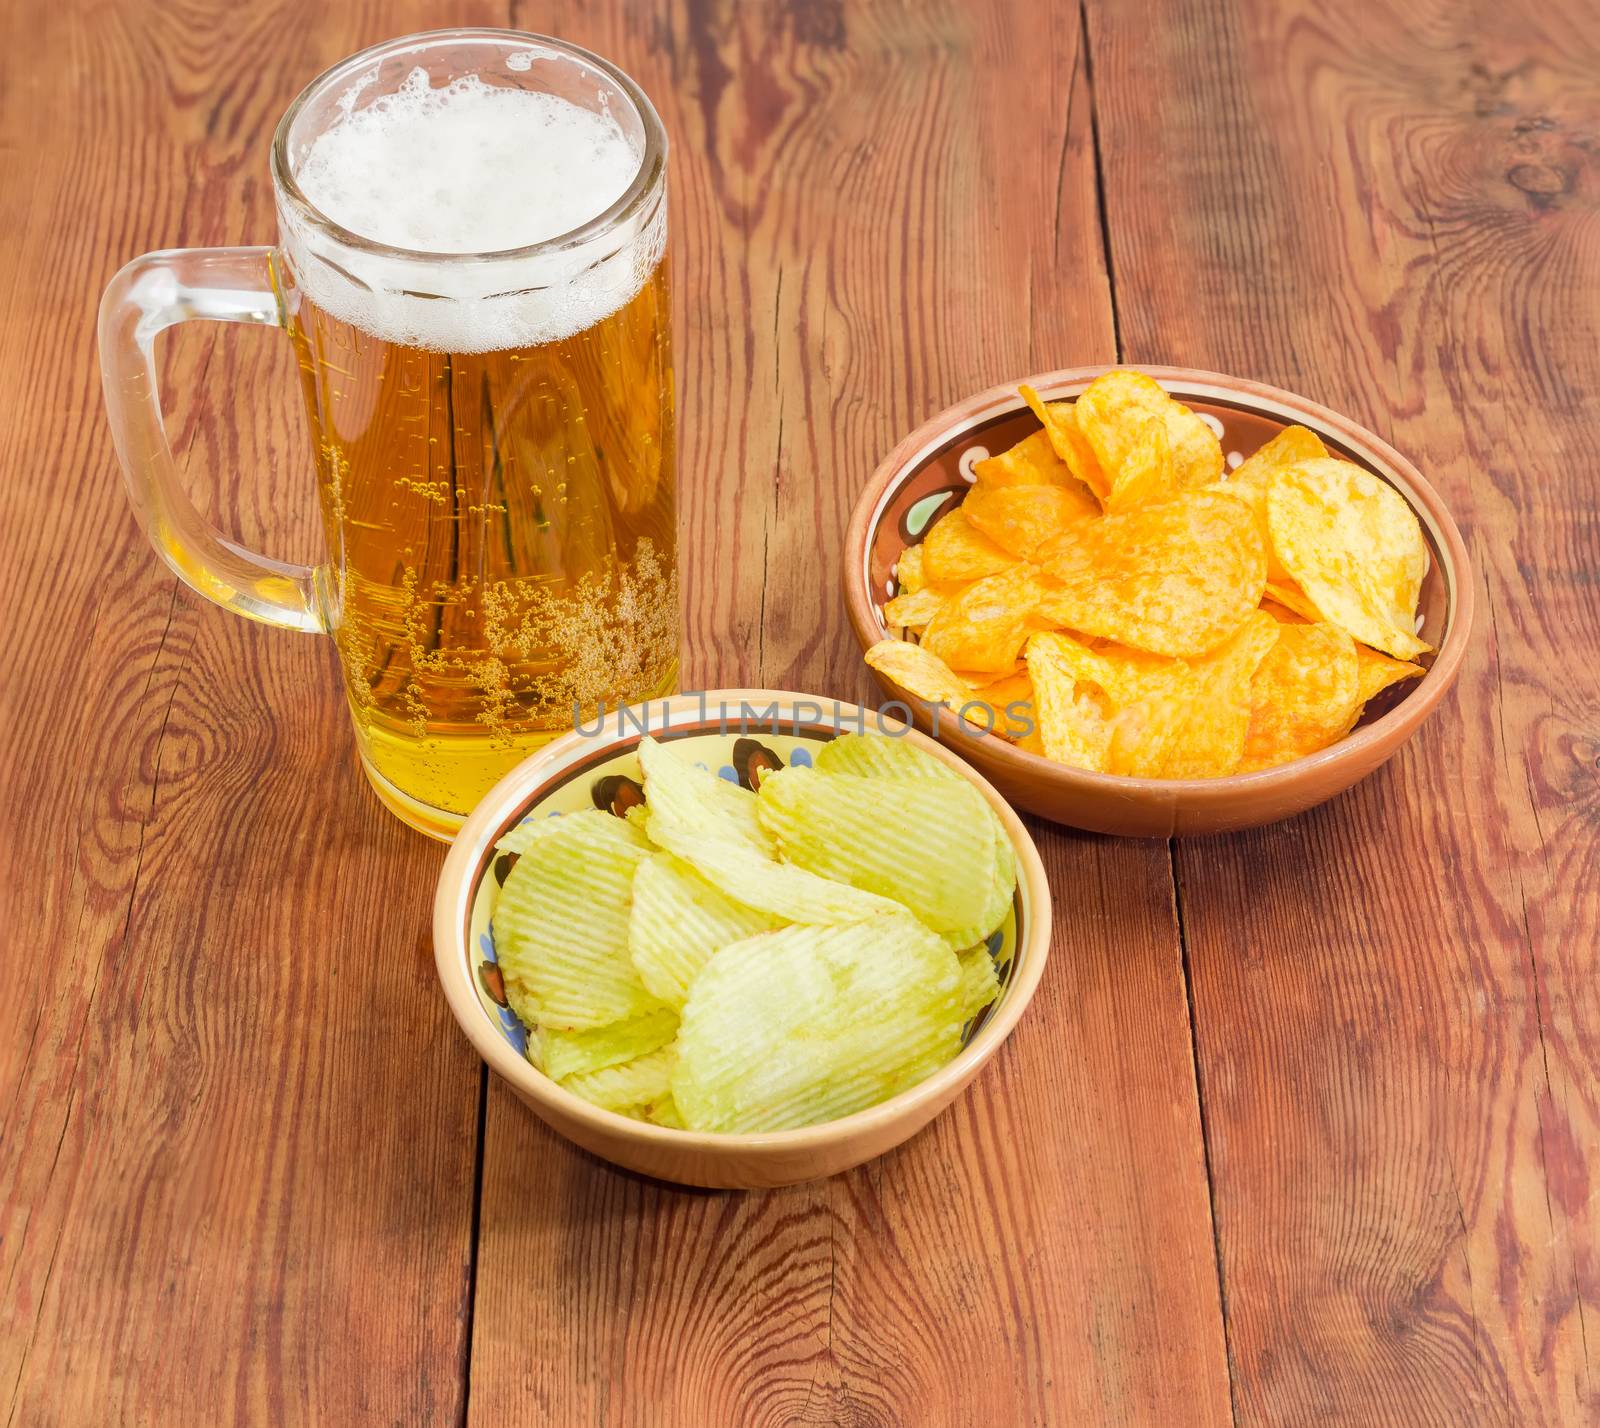 Glass tankard with lager beer, potato chip flavored paprika and wasabi in two different ceramic bowls on an old wooden planks
